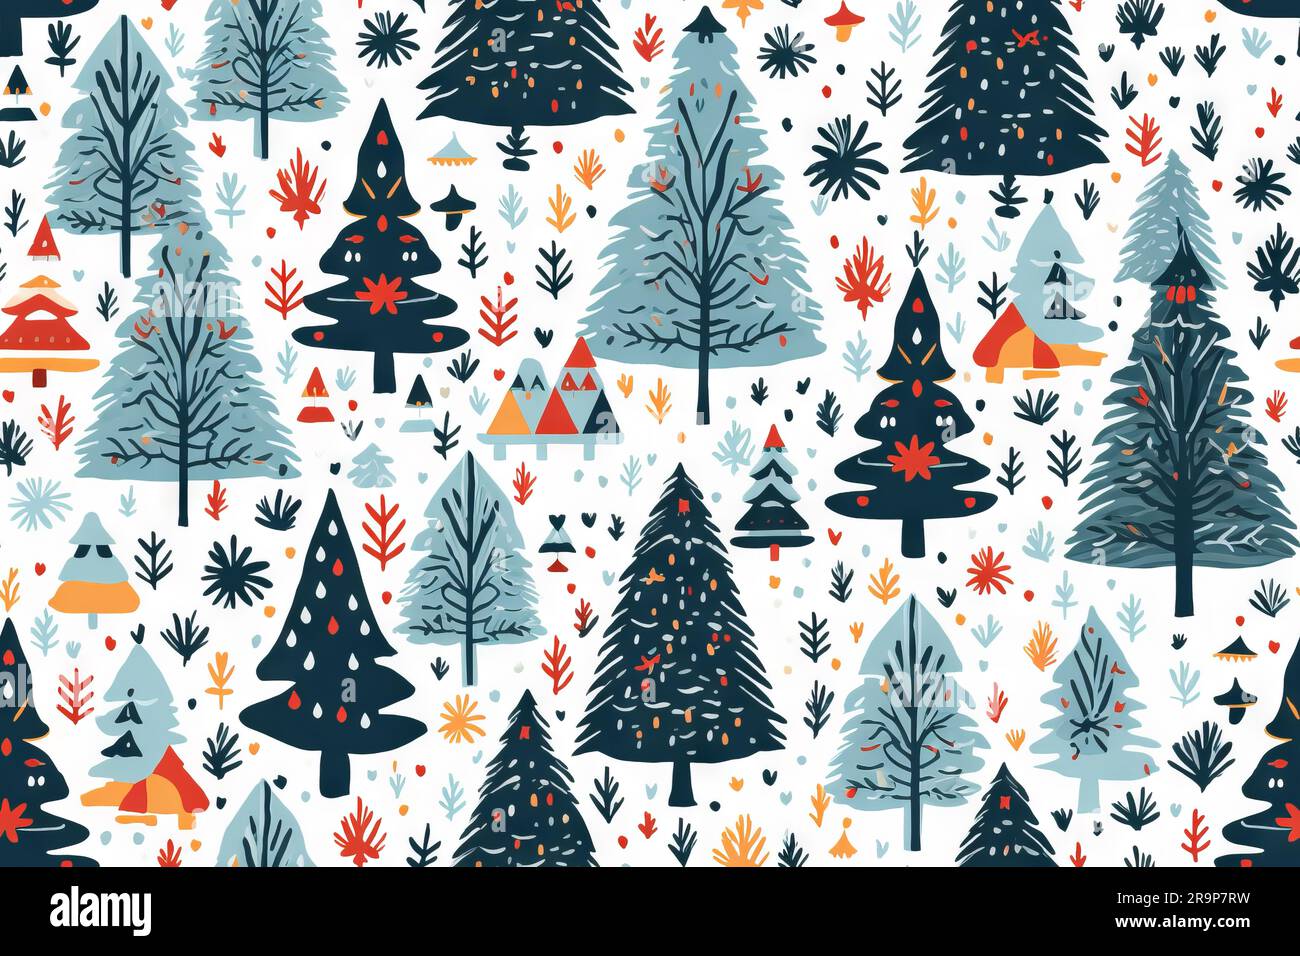 Seamless repeat pattern christmas design background / wrapping paper, christmas tile tilable illustration Stock Photo